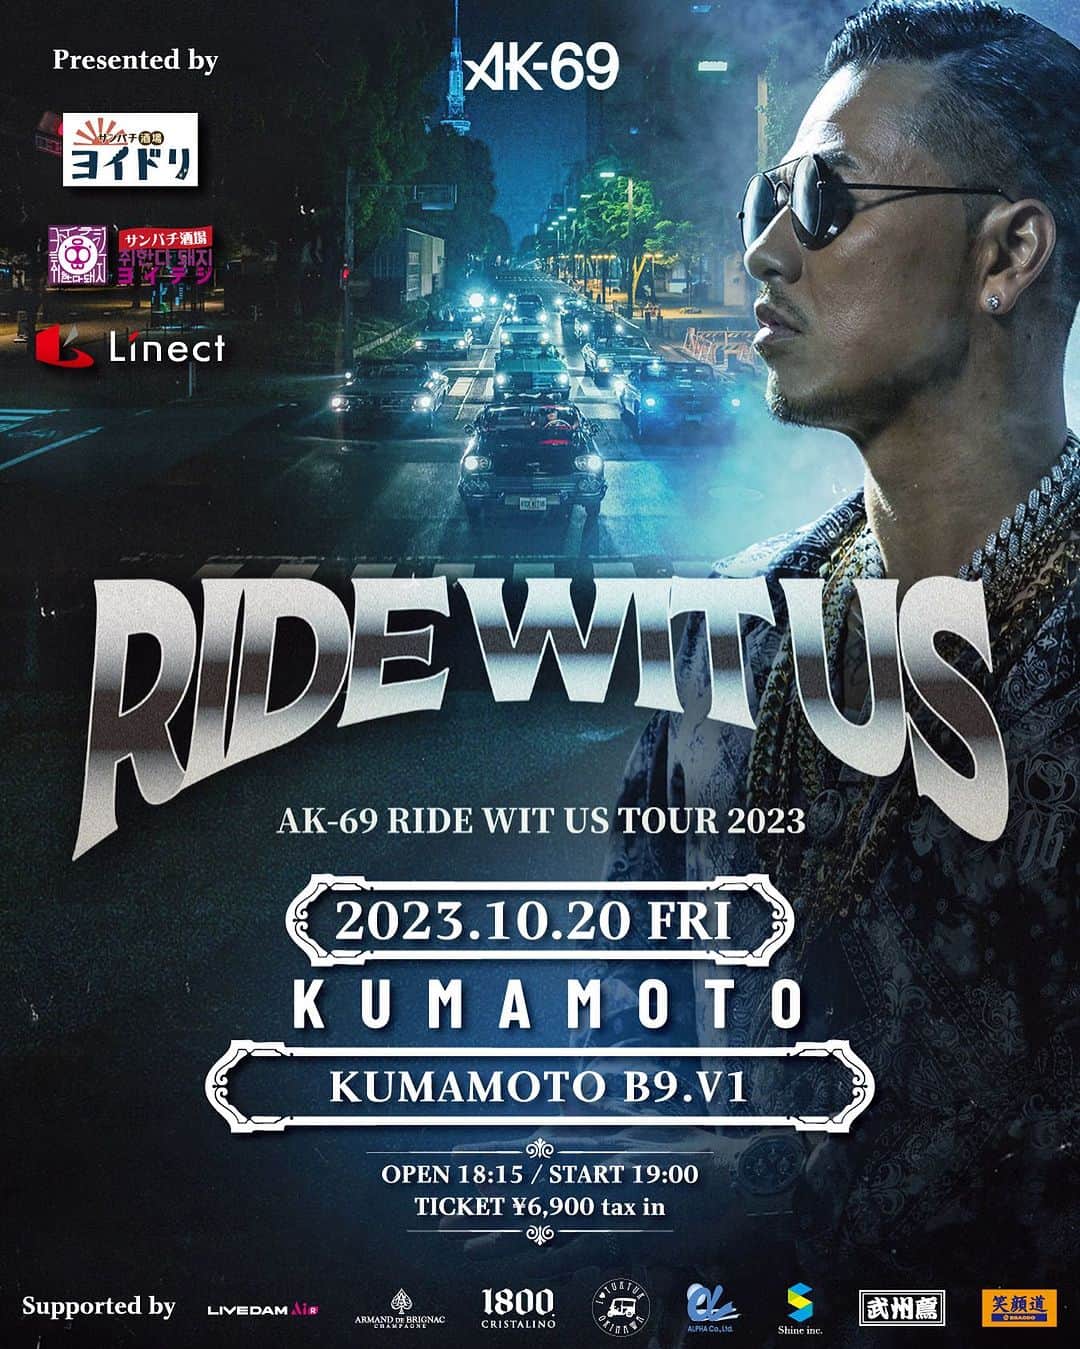 AK-69のインスタグラム：「"RIDE WIT US TOUR 2023" Presented by サンパチ酒場ヨイドリ / サンパチ酒場ヨイテジ / リネクト株式会社 ■10.20（金）熊本DRUM Be-9 V1 OPEN 18:15 / START 19:00  #AK69 #RideWitUsTour2023 #全国ツアー #熊本 #サンパチ酒場ヨイドリ #サンパチ酒場ヨイテジ #リネクト #皆の街に会いに行く」